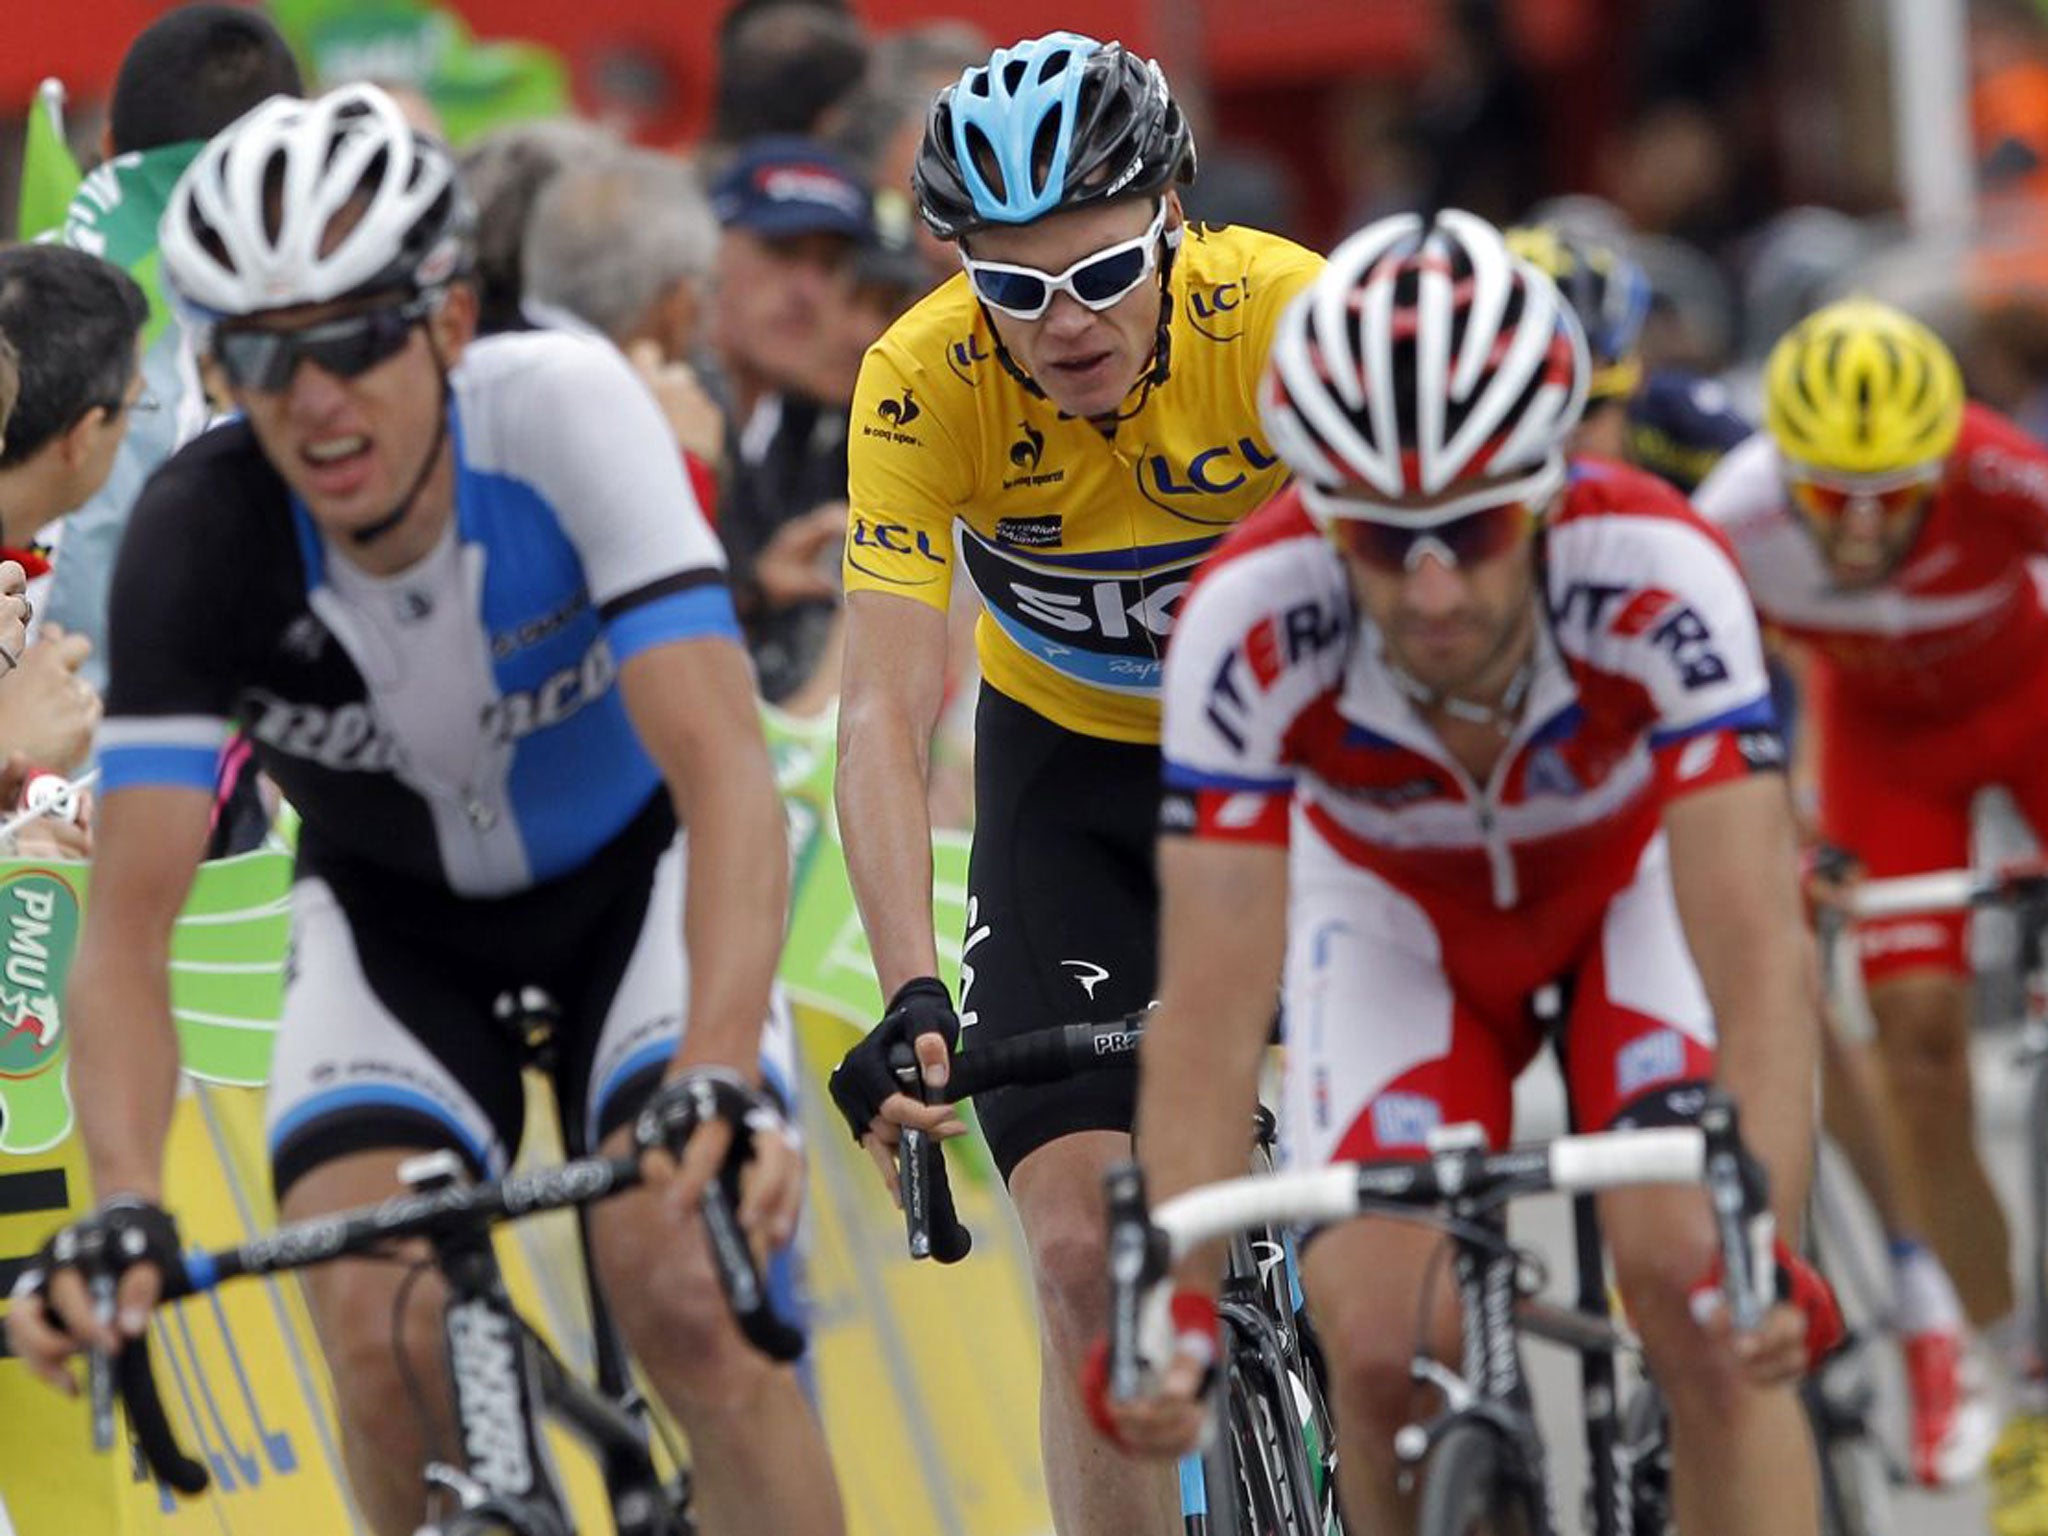 Chris Froome’s measured ride in yesterday’s stage keeps him on track to win the Critérium du Dauphiné